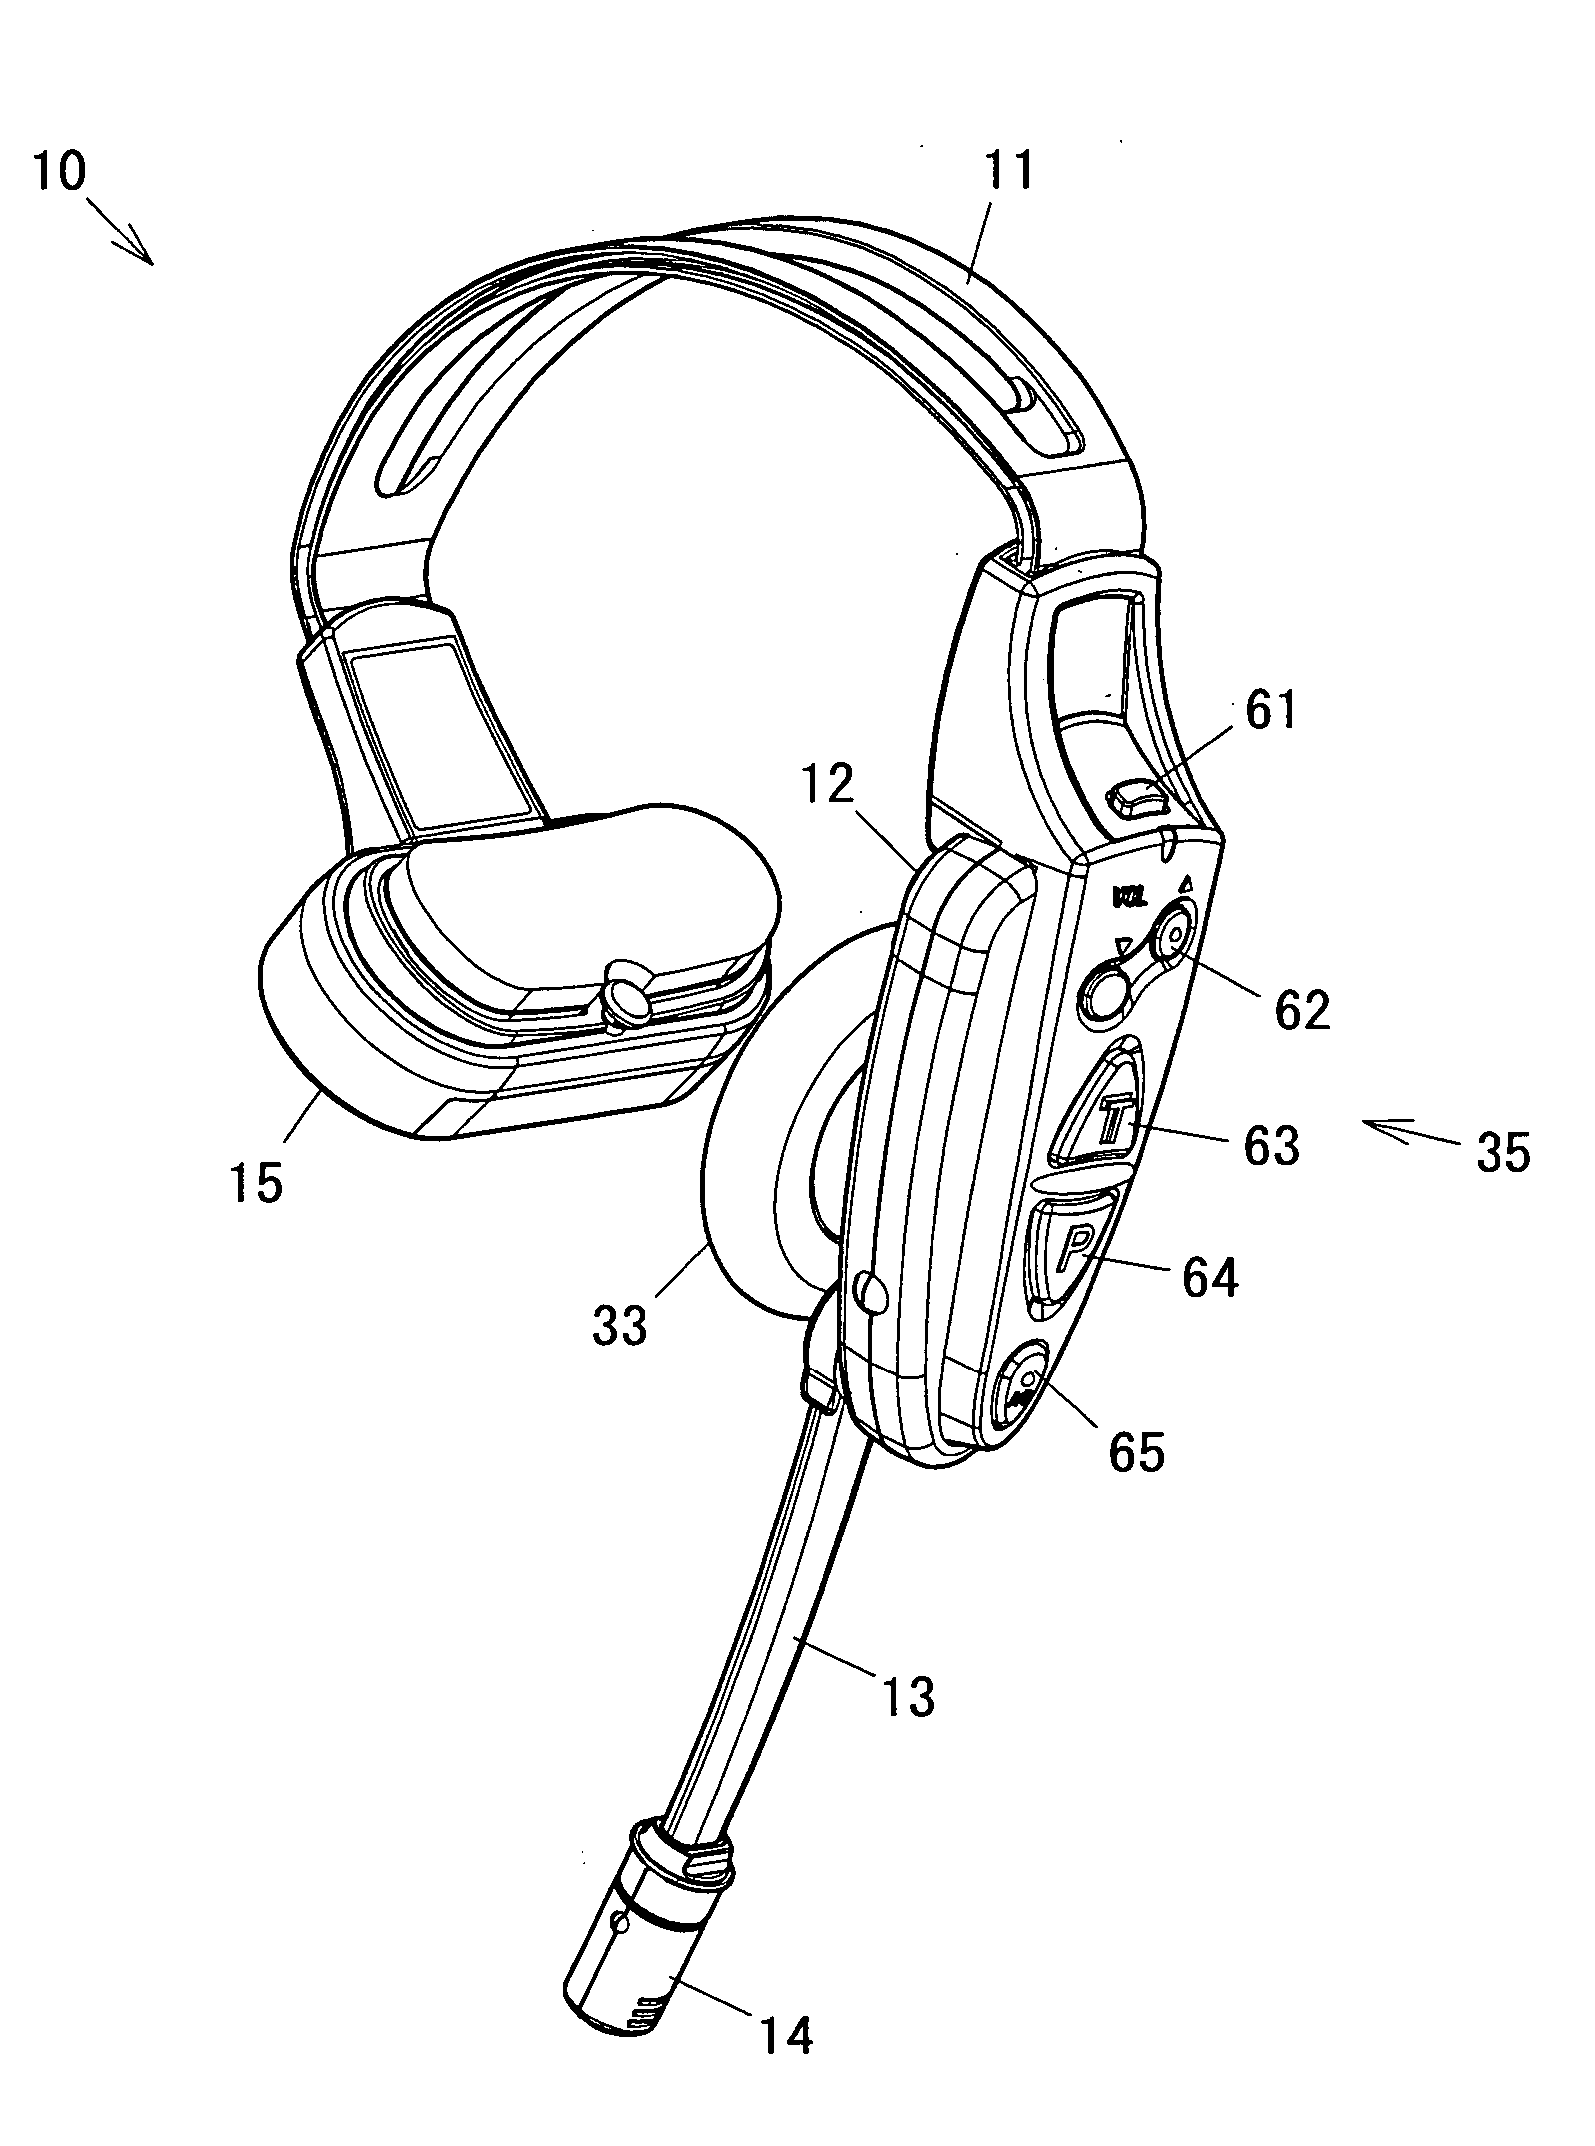 All-in-one headset